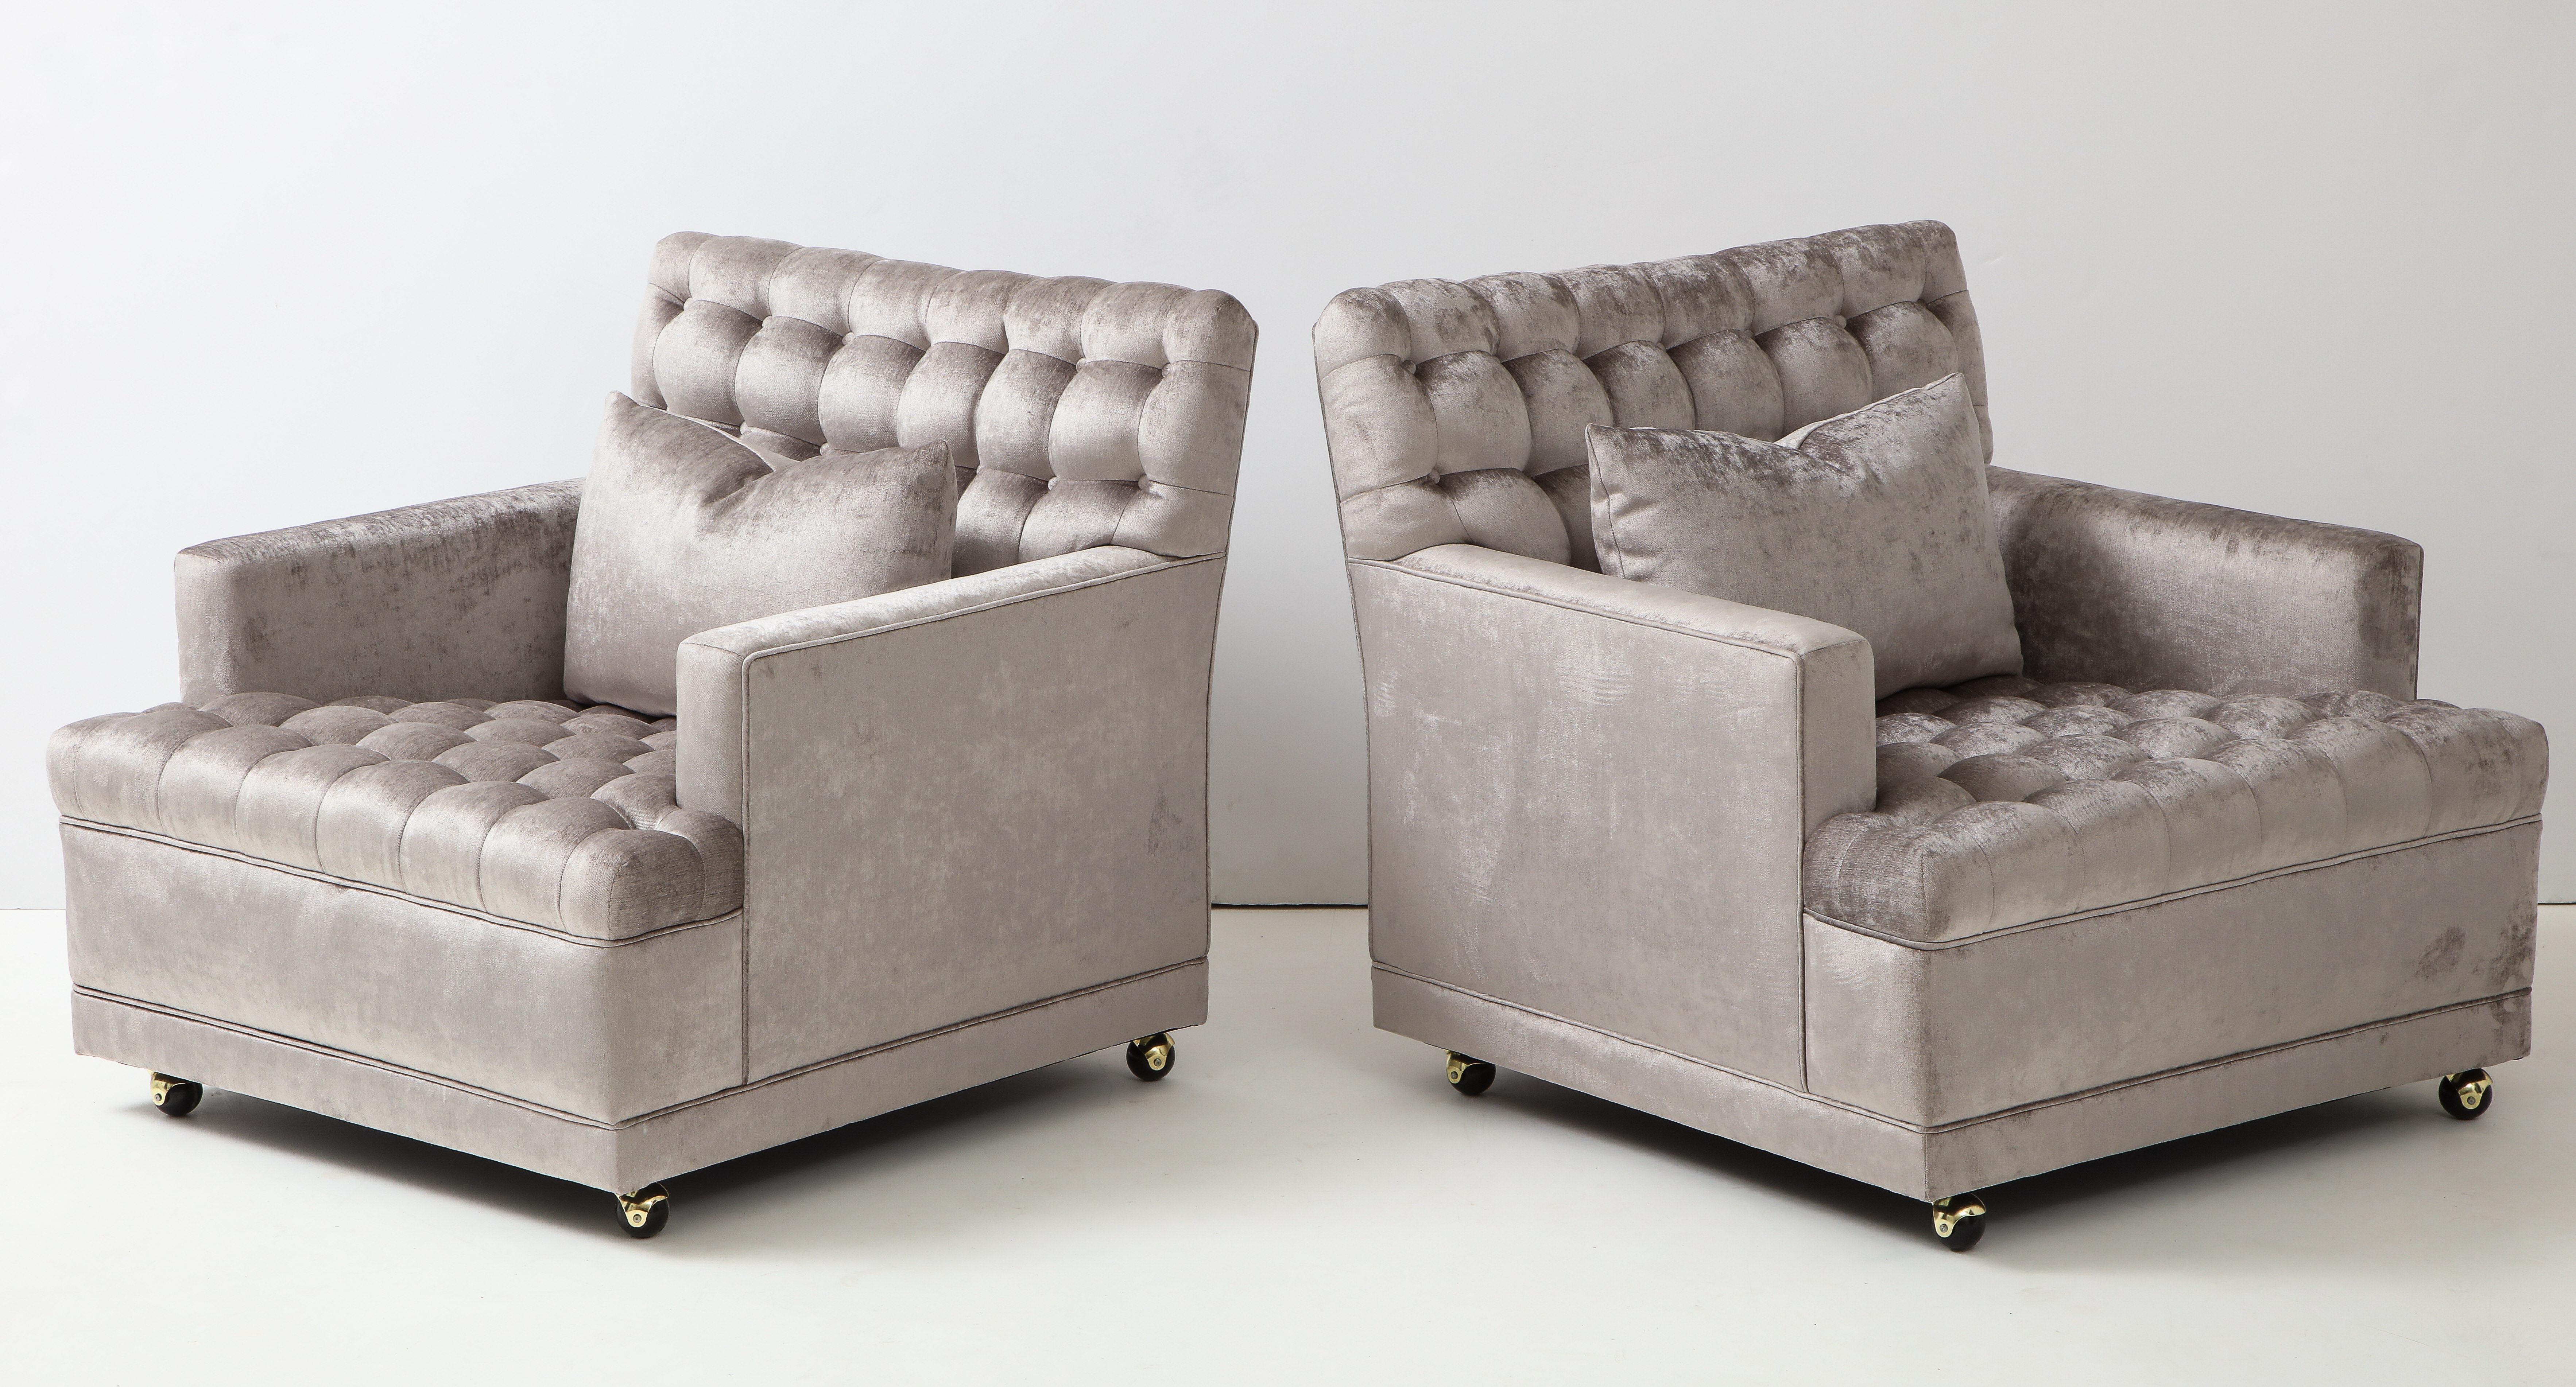 Pair of Biscuit Tufted Club Chairs. 4